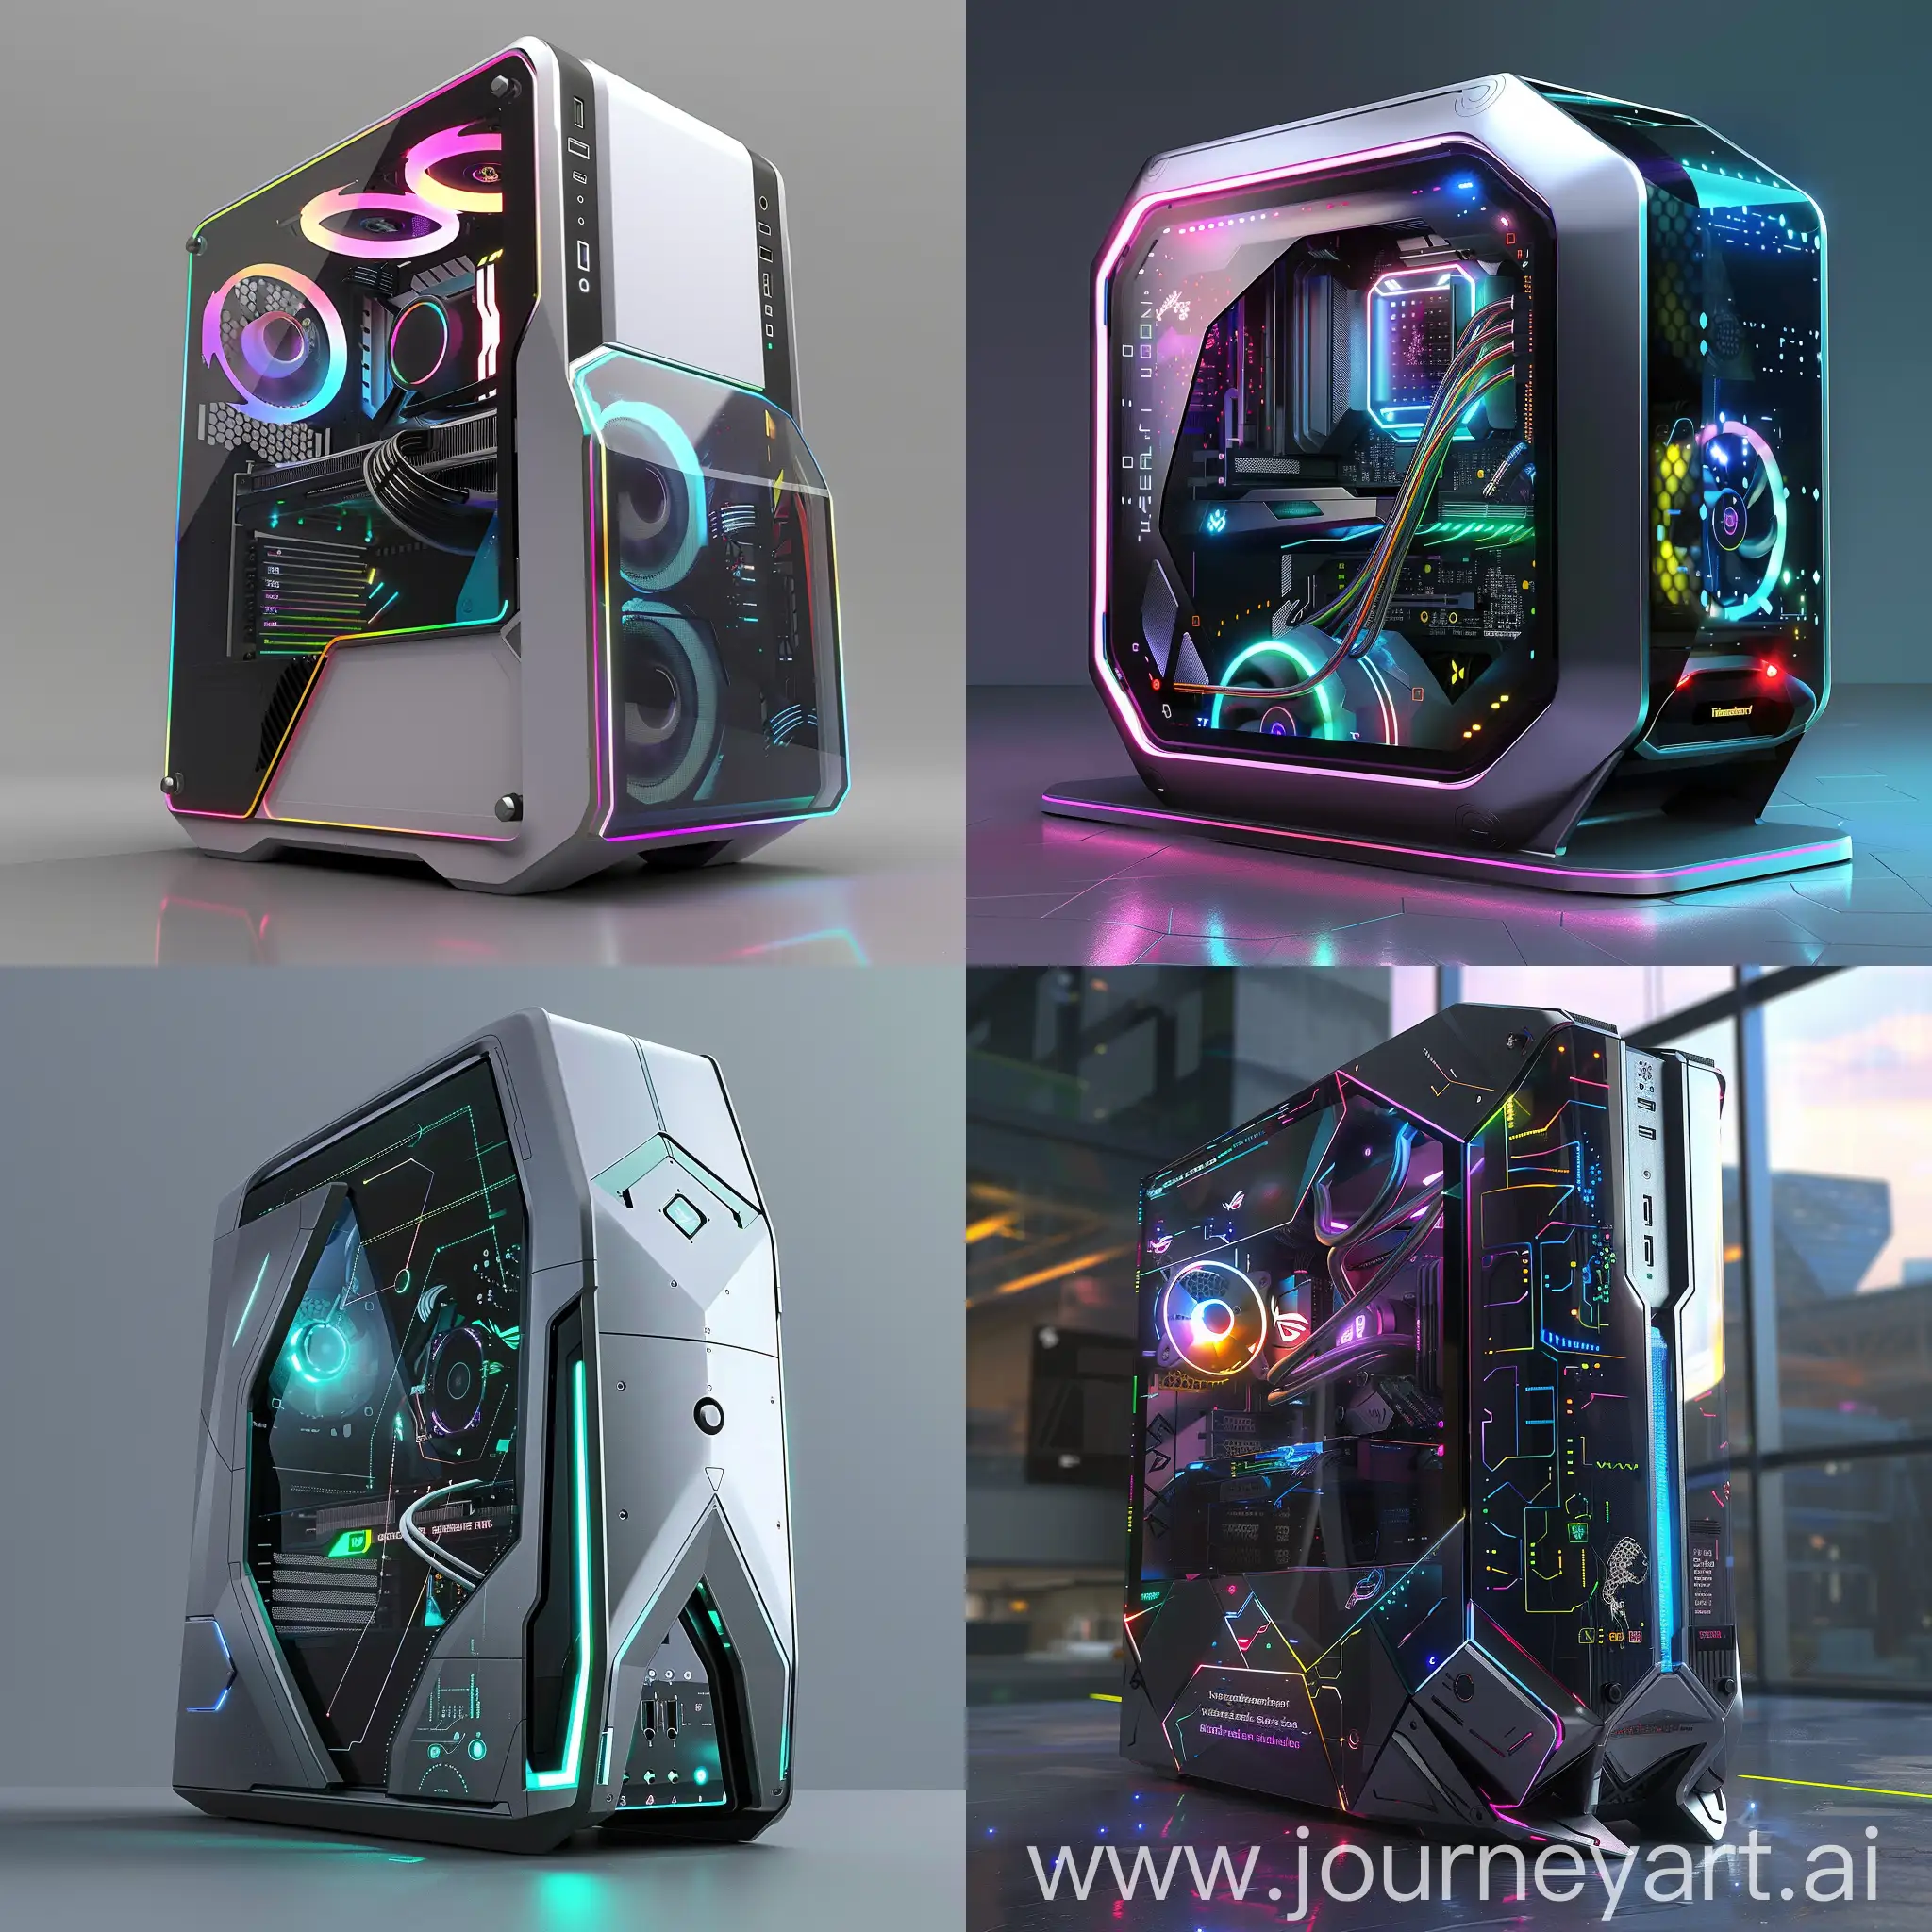 High-tech futuristic PC case, Modular Design, Integrated Cooling Systems, Smart Glass Panels, Wireless Charging Surfaces, Dynamic RGB Lighting, Sound Dampening Materials, Tool-less Access, Built-in Display, Eco-Friendly Materials, Aerodynamic Shape, Self-Healing Materials, Thermal Diodes, Photonic Circuitry:, Nano-Air Filtration, Vibration Energy Harvesting, Molecular Heat Sinks, Quantum Dot Displays, Nanotube Wiring, Smart Dust Sensors, Programmable Matter, Transparent OLED Touchscreen, Solar Panel Integration, Morphing Exterior, Ambient Light Sensors, Integrated Projector, Retractable Ports, Holographic Display, Voice Recognition Module, Biometric Security, Environmental Sensors, Photocatalytic Coating, Nano-Paint, Electrochromic Surface, Nanobot Cleaners, Aerogel Insulation, Piezoelectric Energy Harvesting, Nanofiber Air Purifiers, OLED Skin, Thermochromic Materials, Nanocomposite Glass, unreal engine 5 --stylize 1000